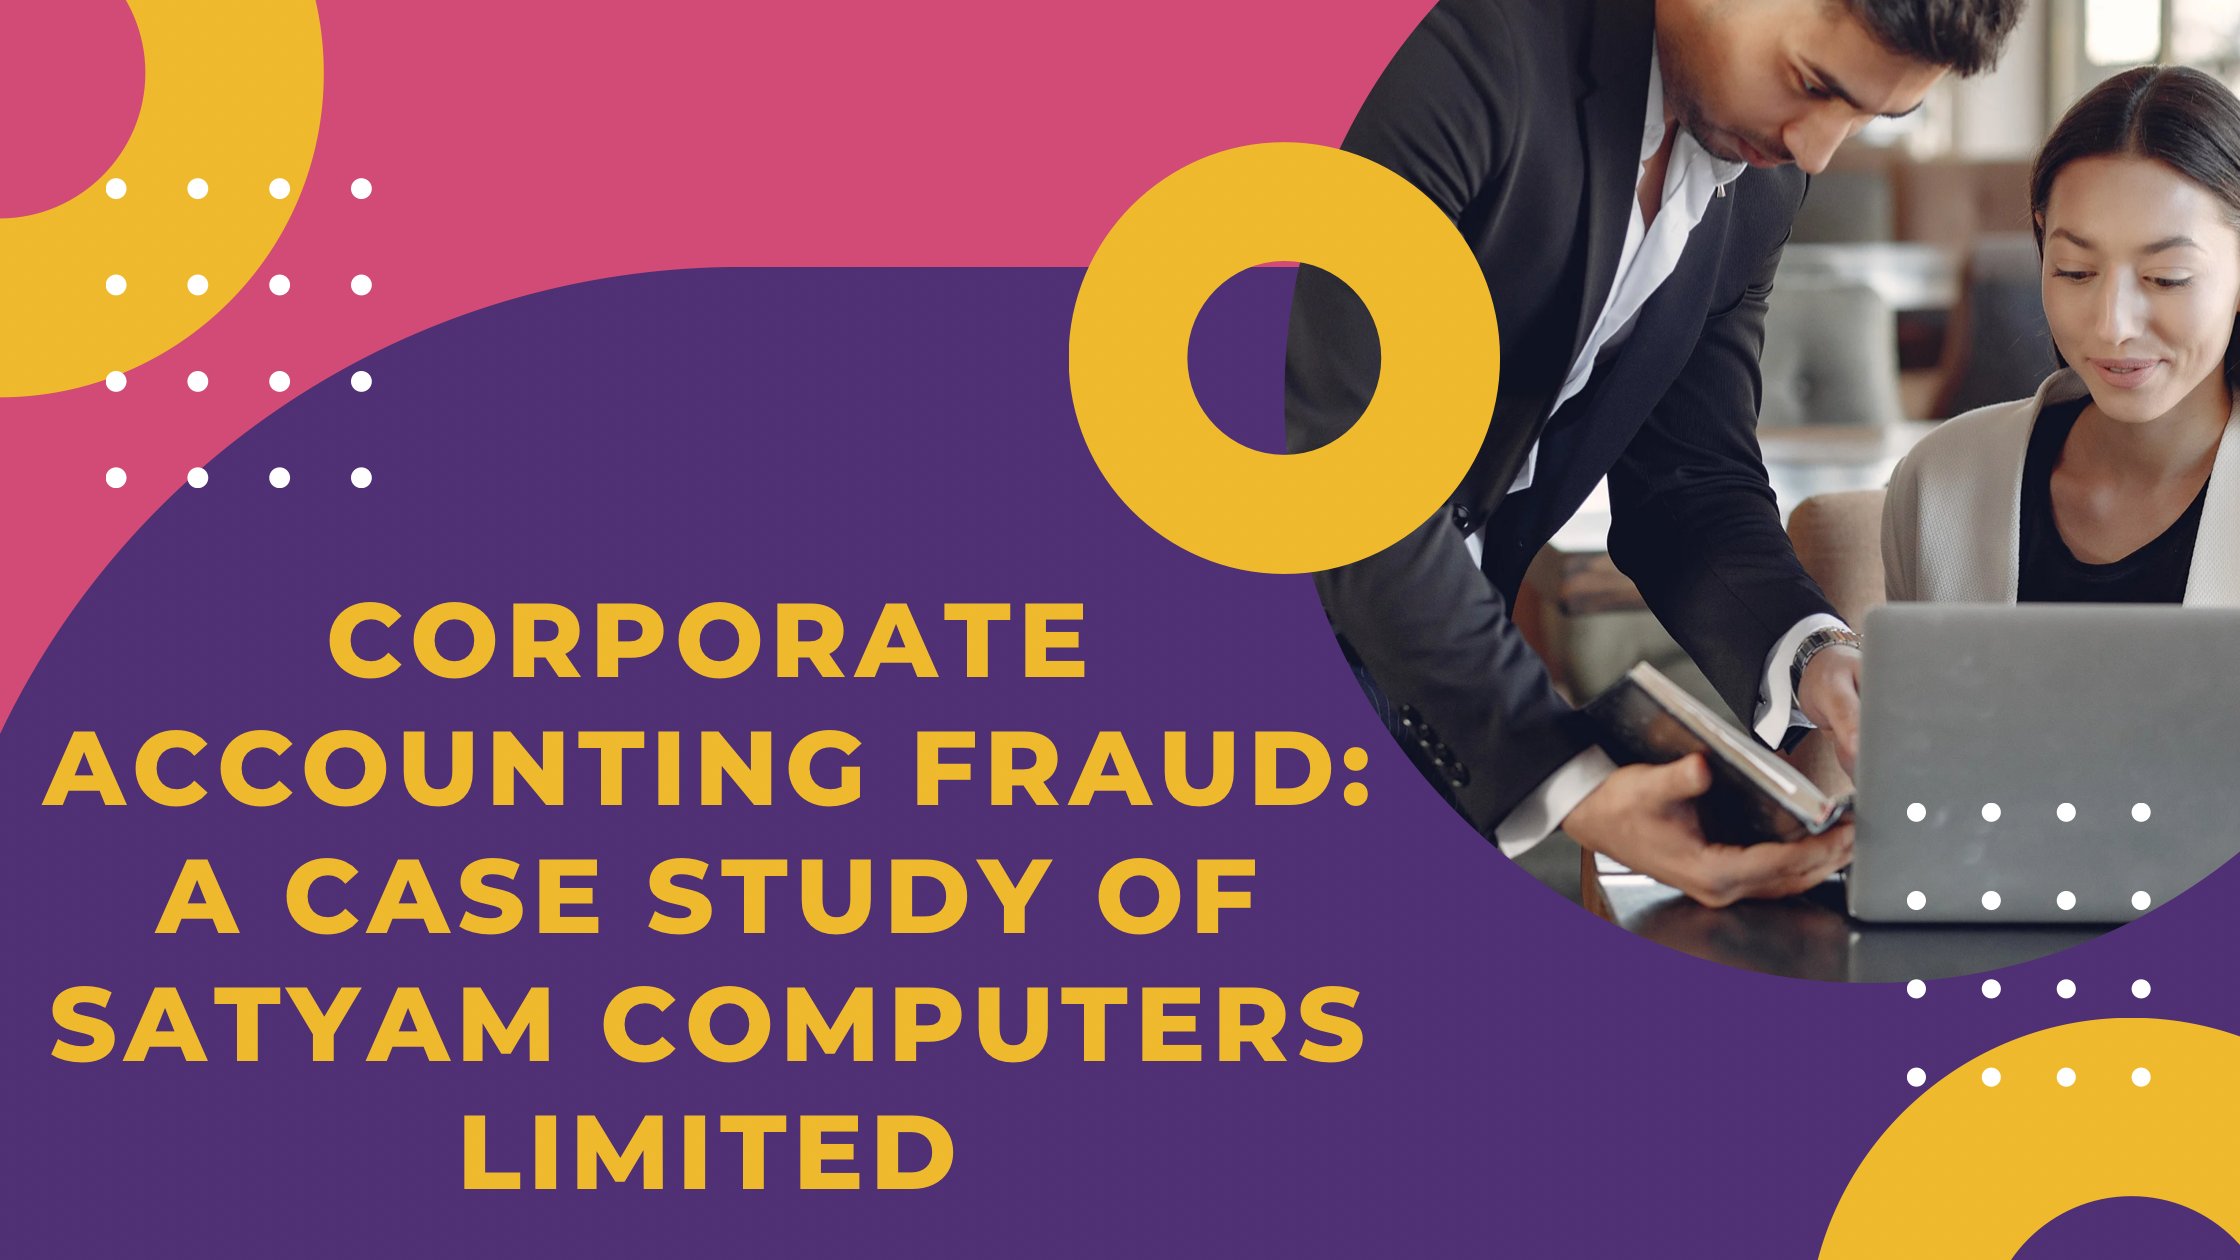 Corporate accounting fraud: A case study of Satyam Computers limited.